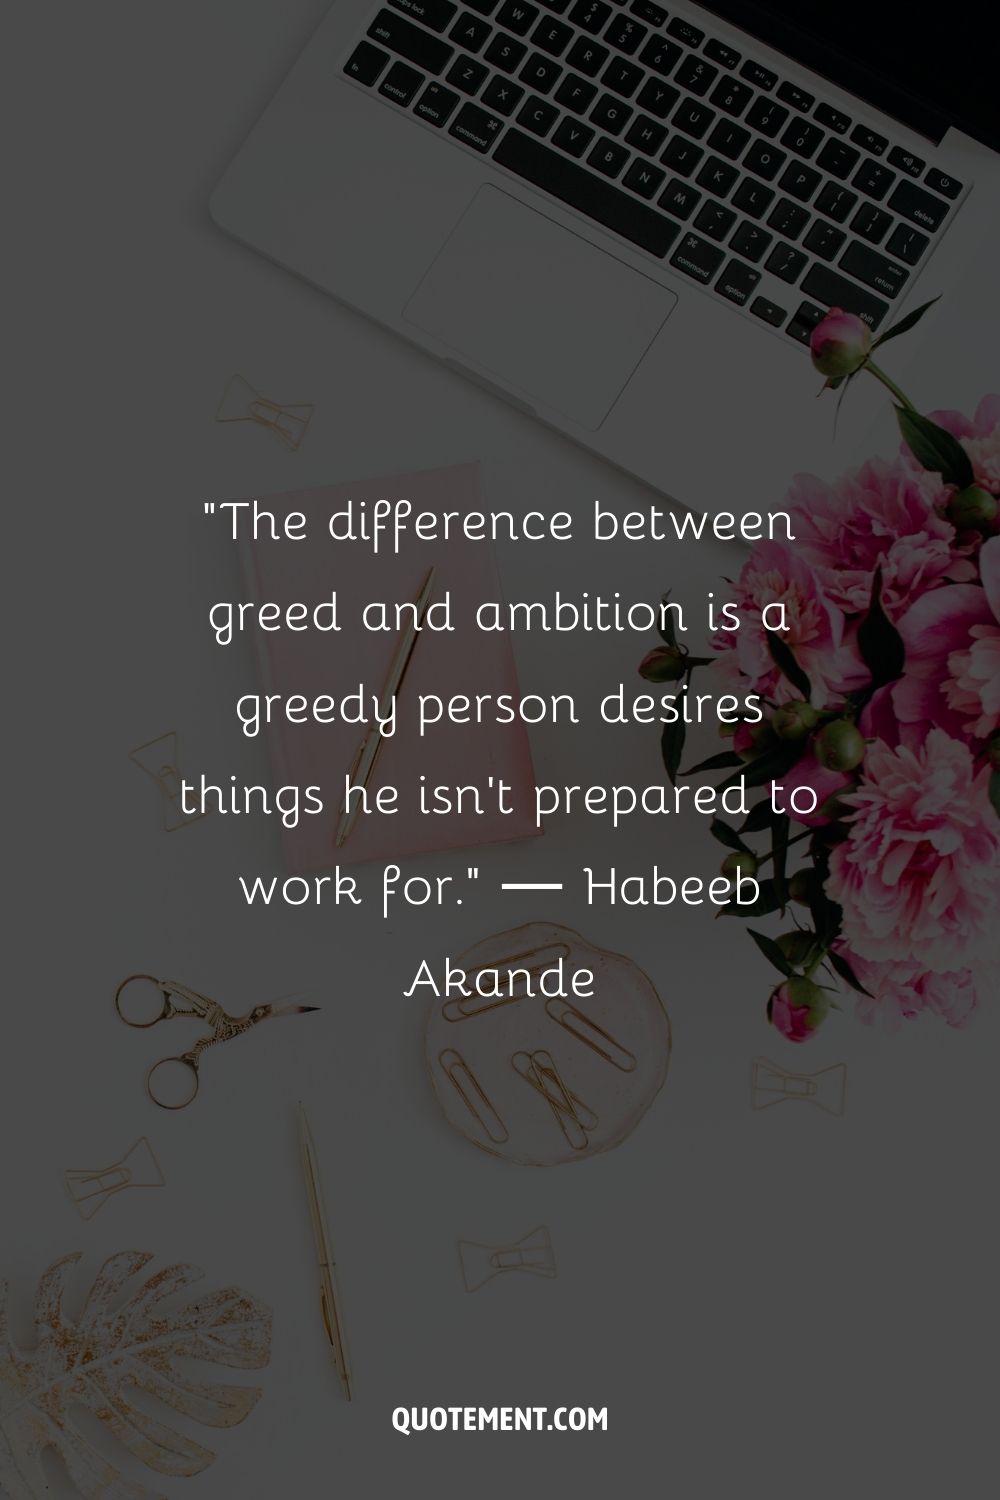 “The difference between greed and ambition is a greedy person desires things he isn't prepared to work for.” ― Habeeb Akande